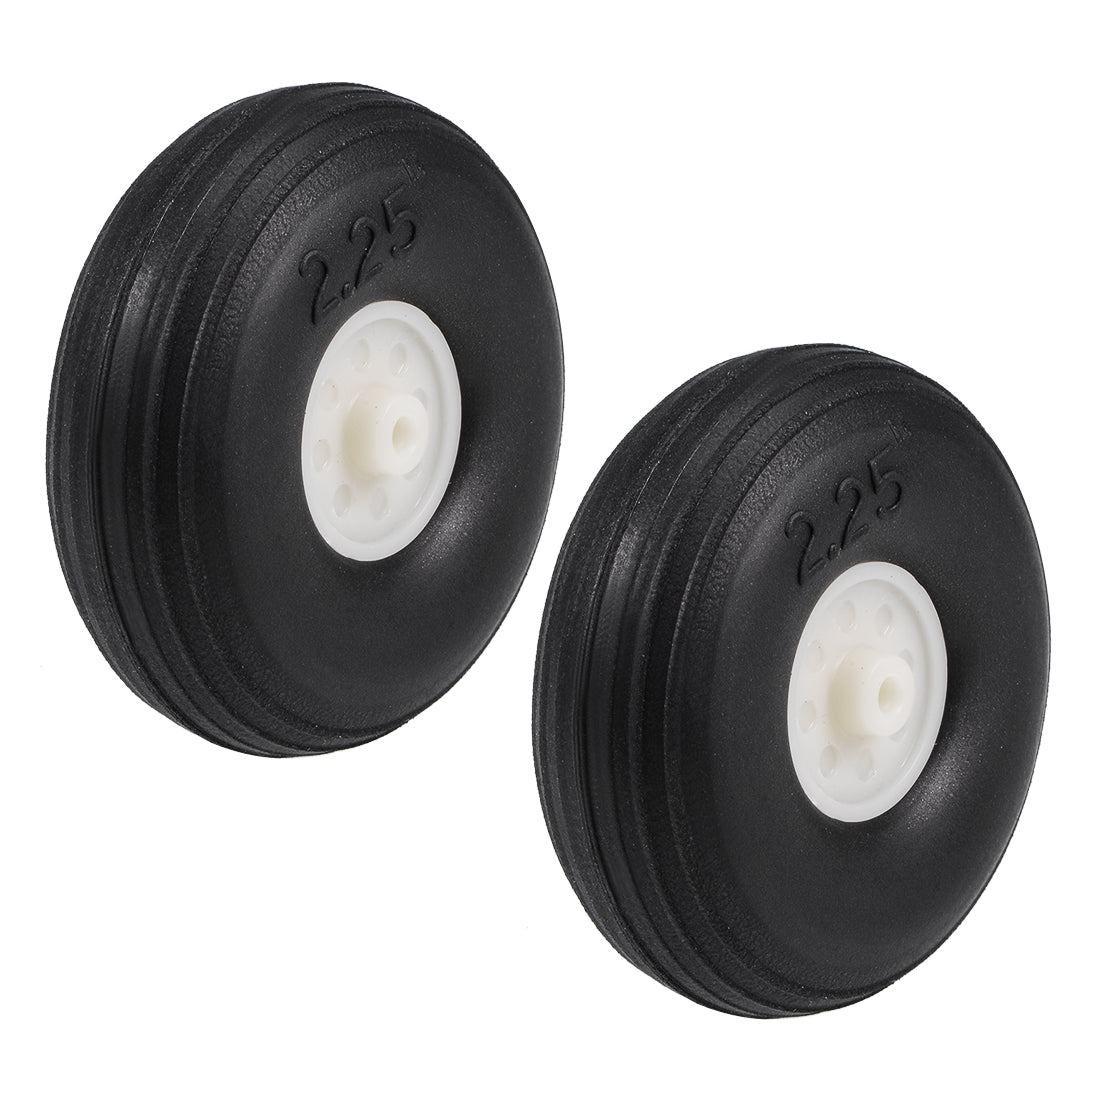 uxcell Uxcell Tire and Wheel Sets for RC Airplane,PU Sponge Tire with Plastic Hub,2.25" 2pcs